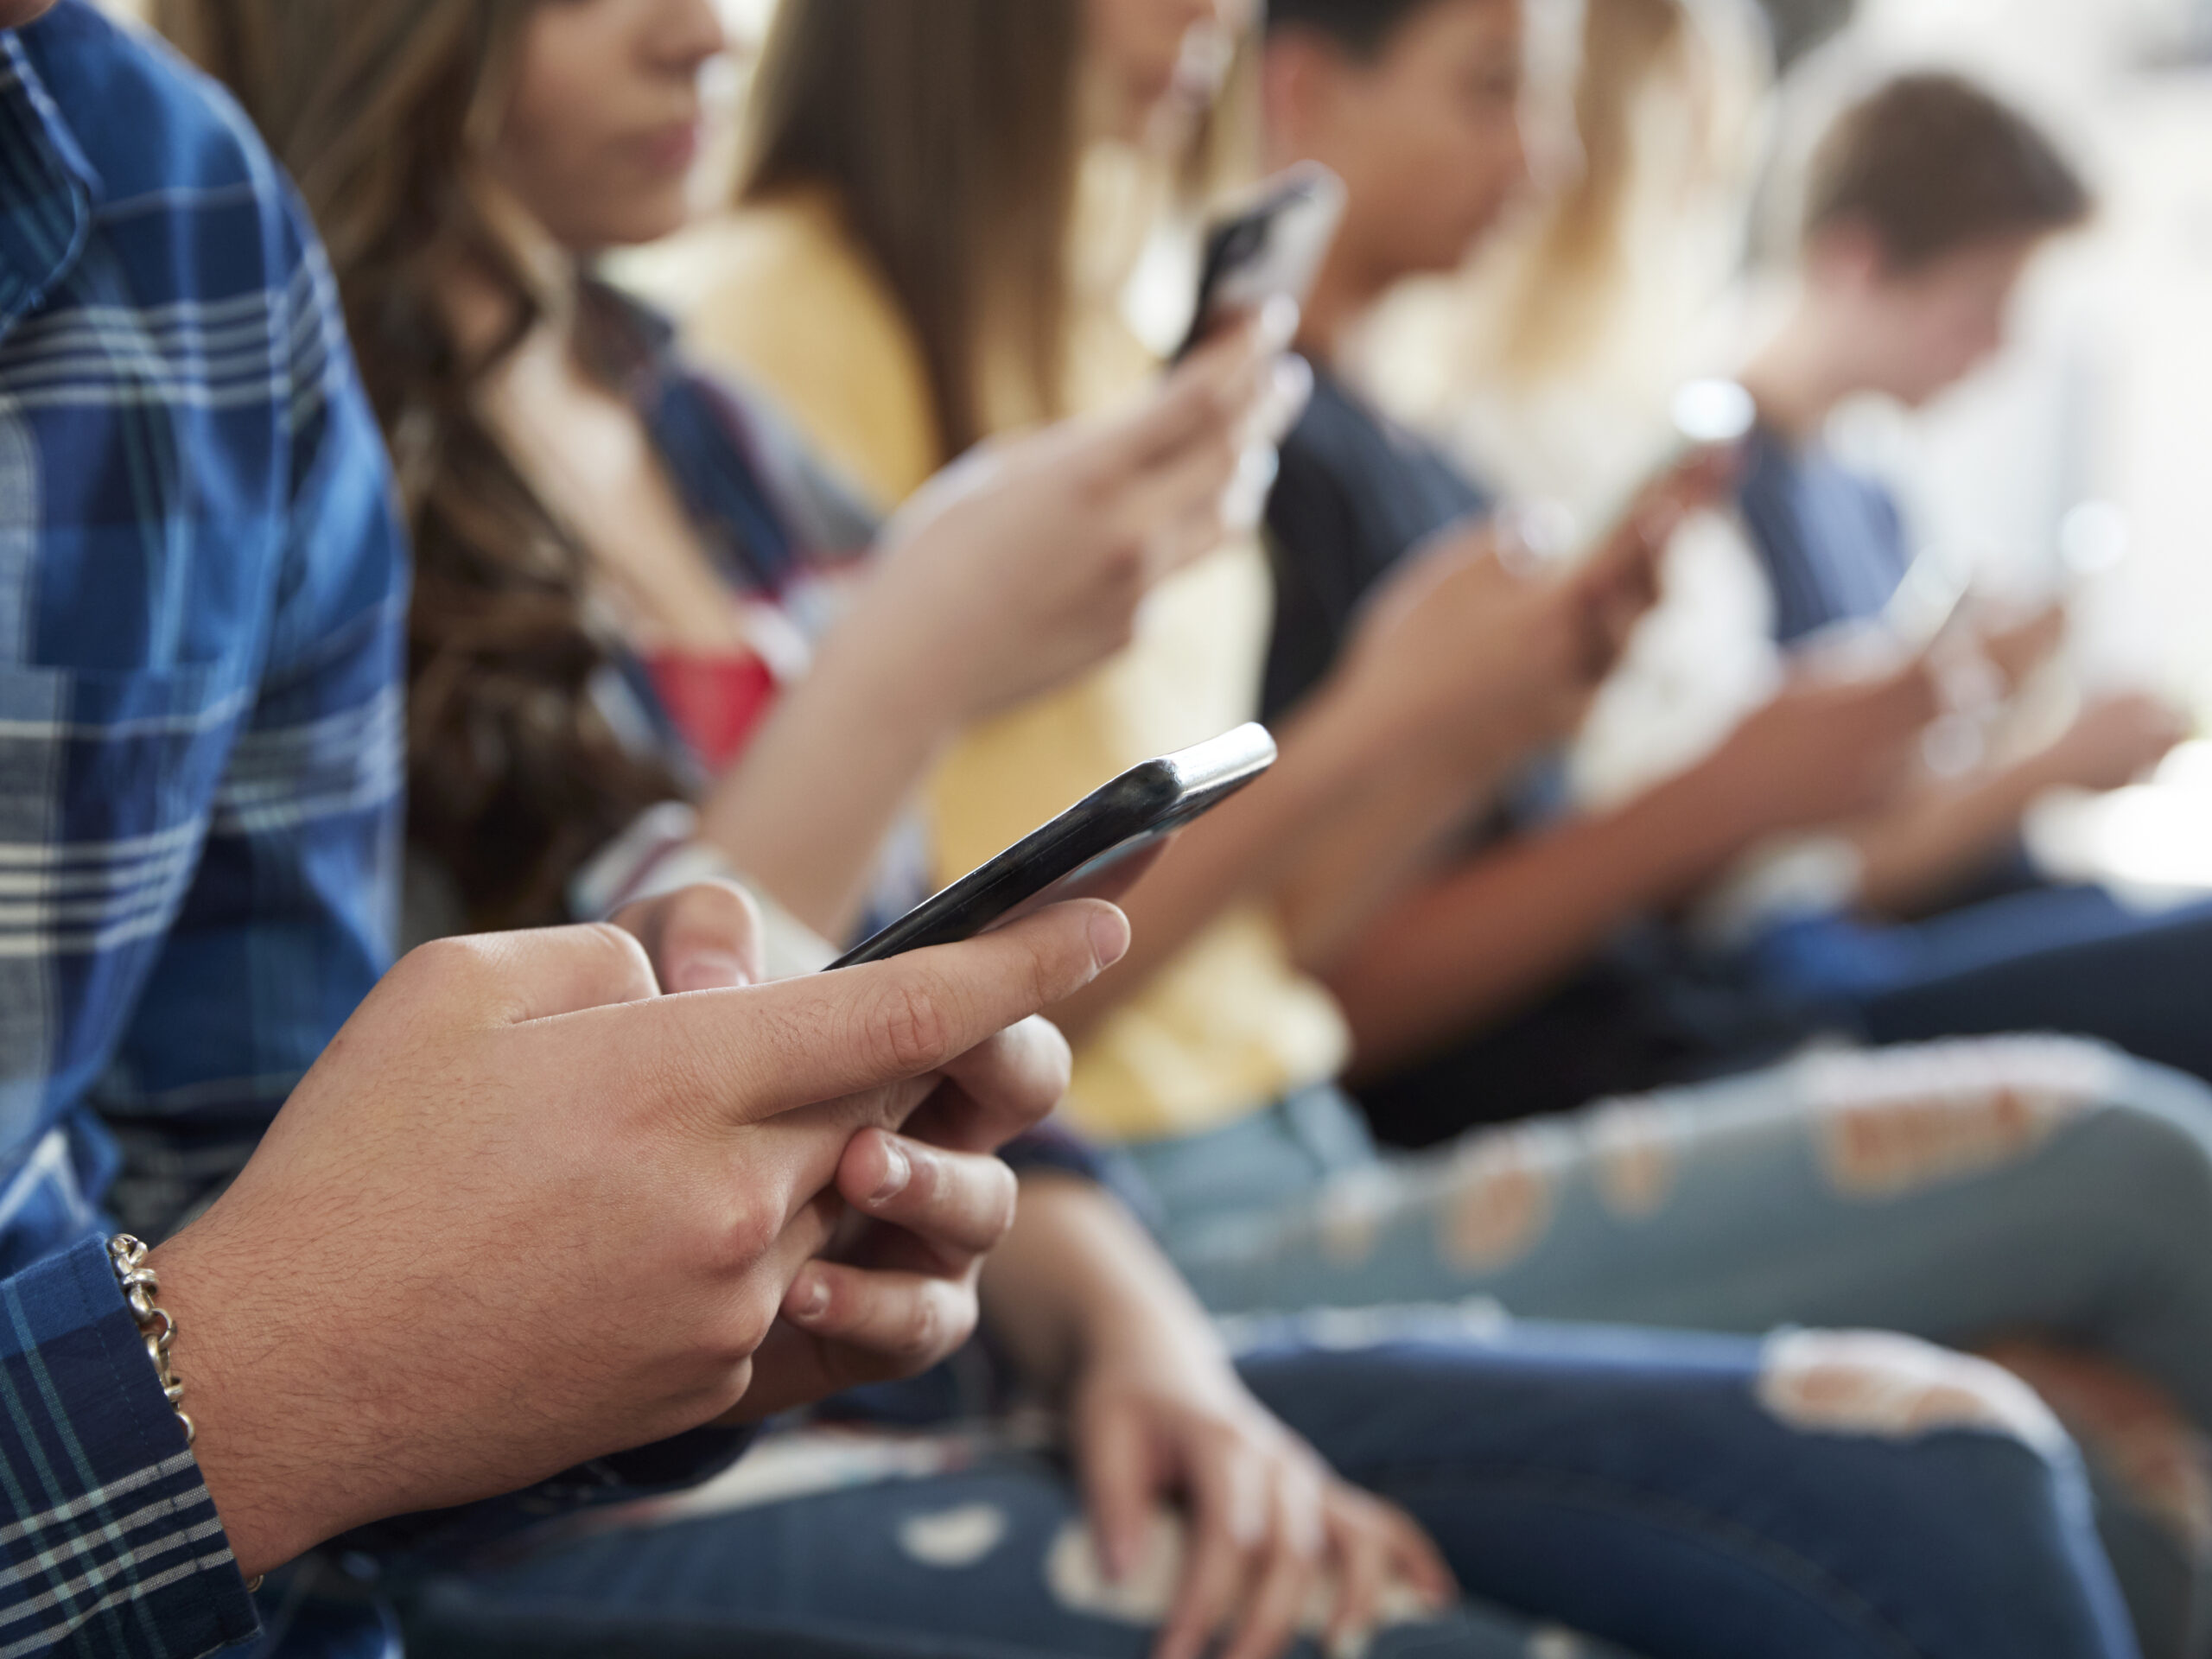 Indiana lawmakers ban cellphones in class. Now it’s up to schools to figure out how